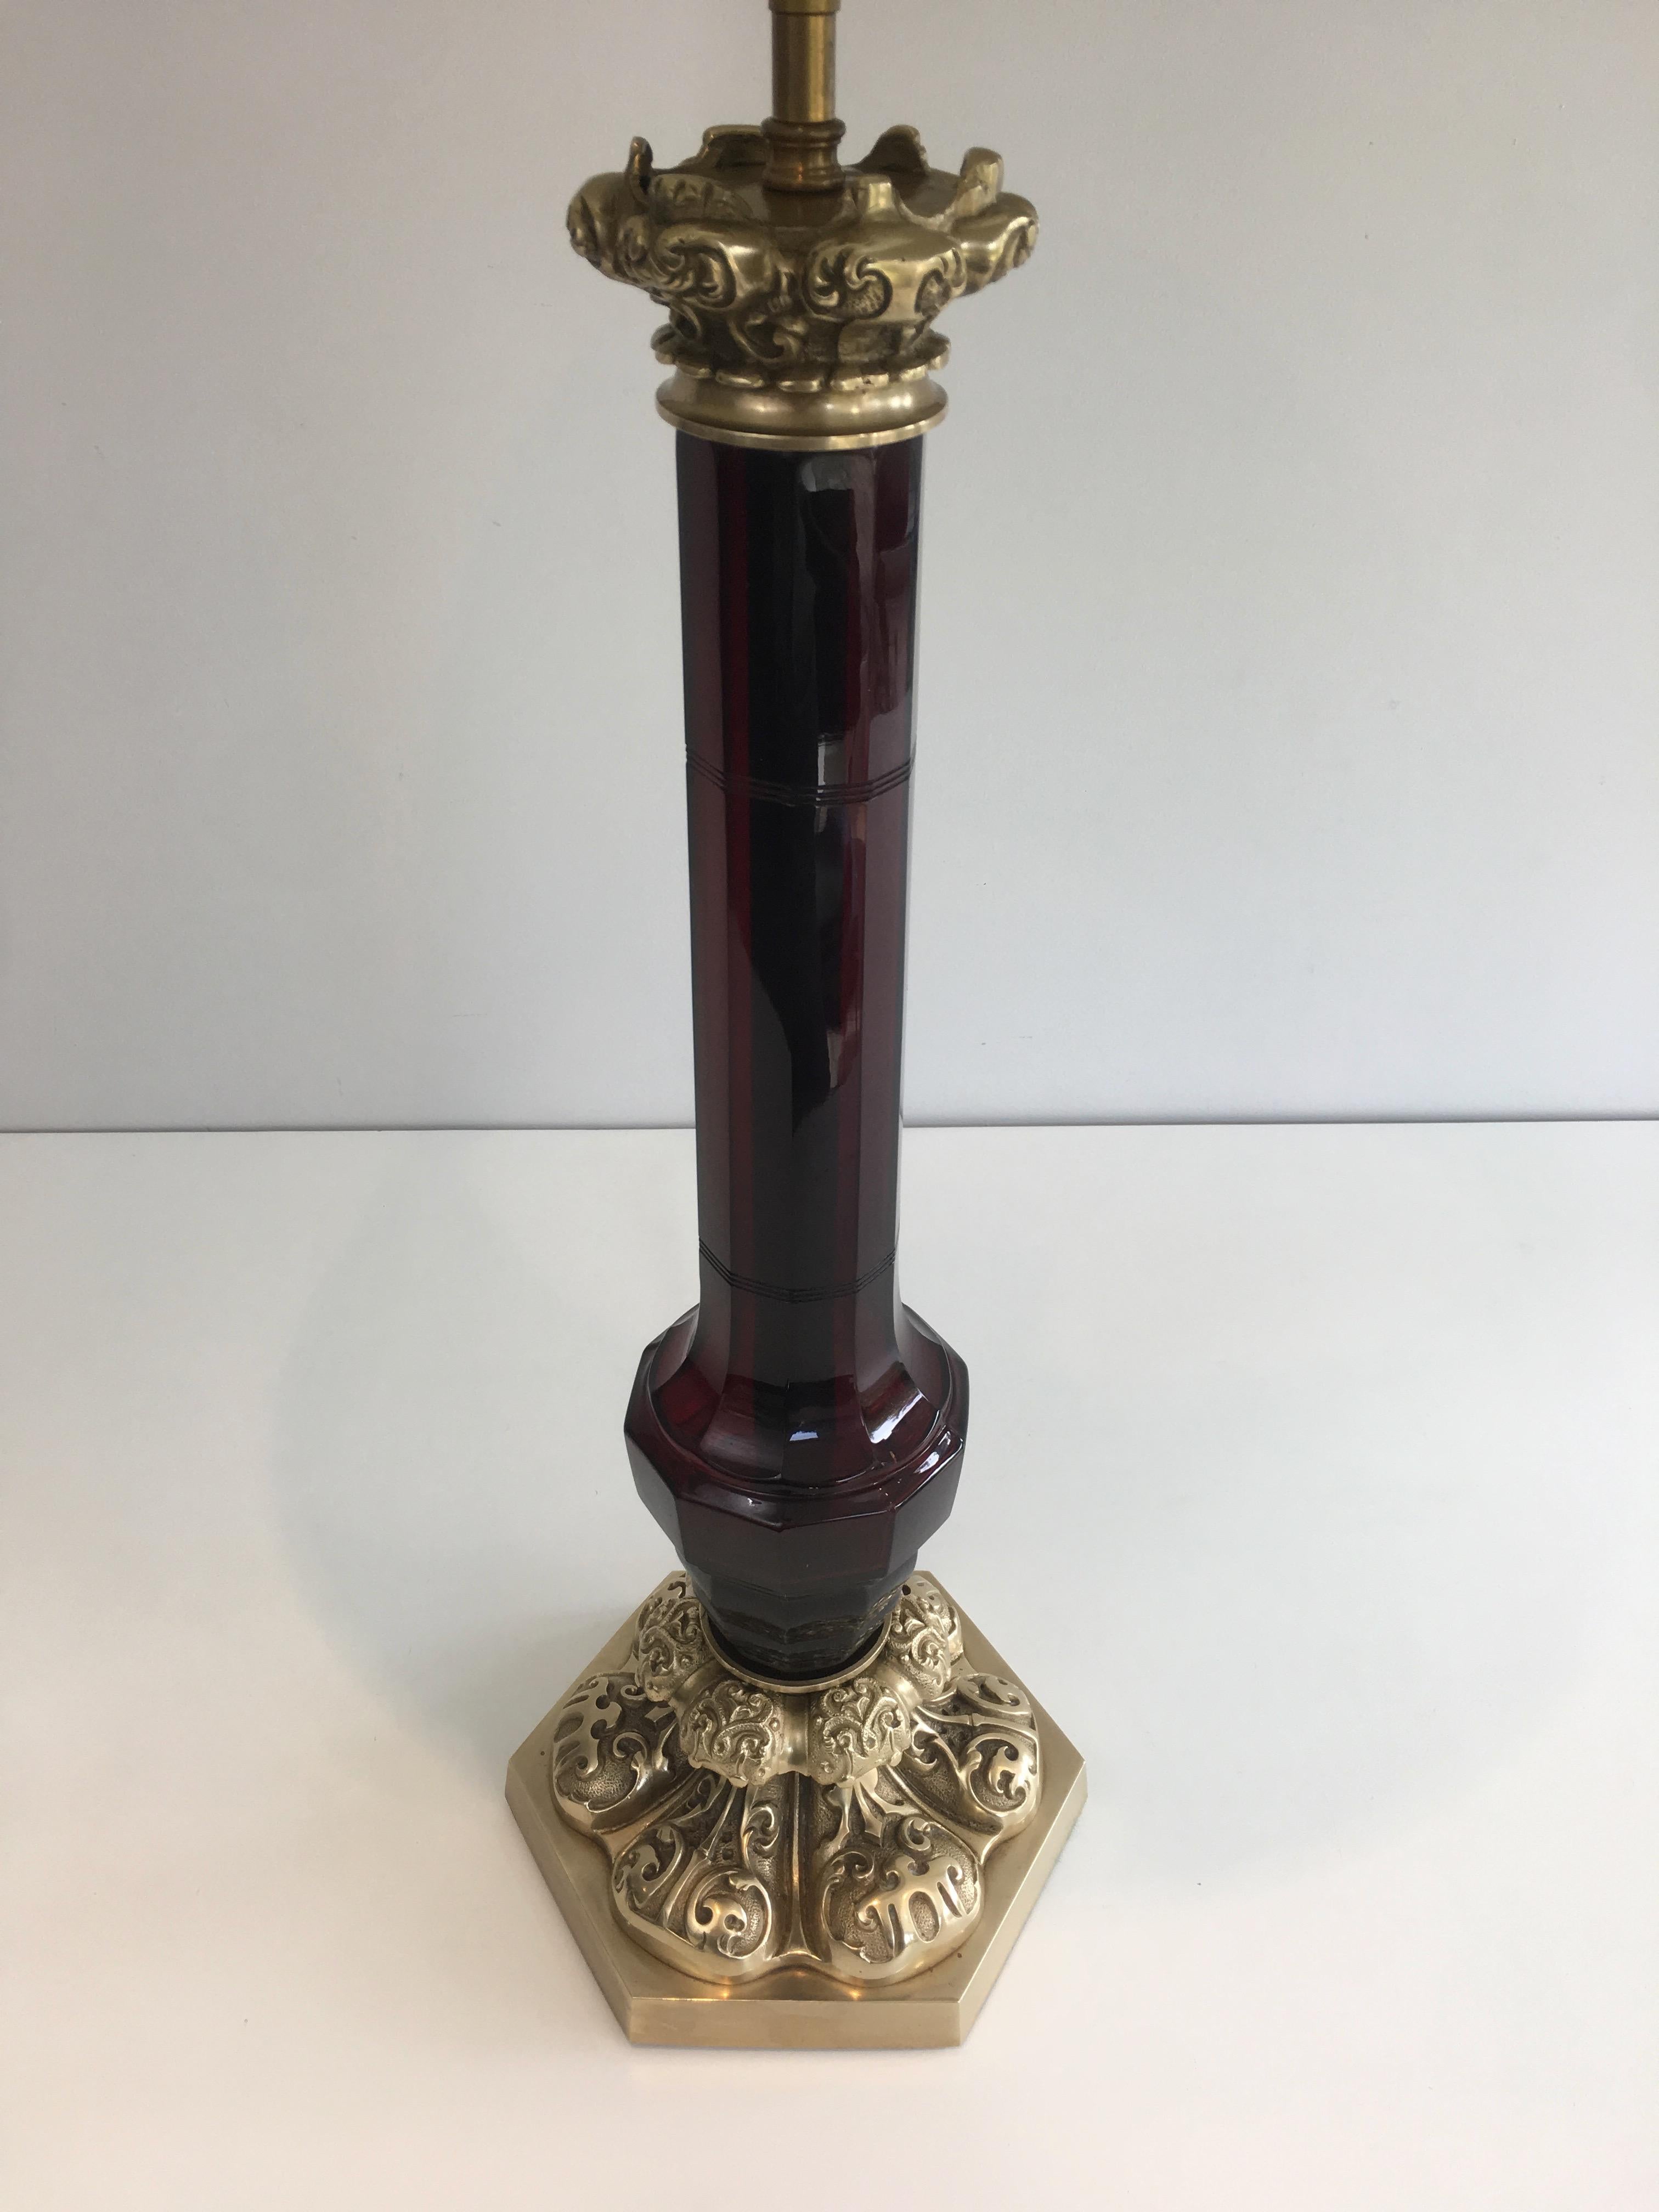 Attributed to Cristal & Bronze Paris, Tall Red Crystal and Chiseled Bronze Table For Sale 2